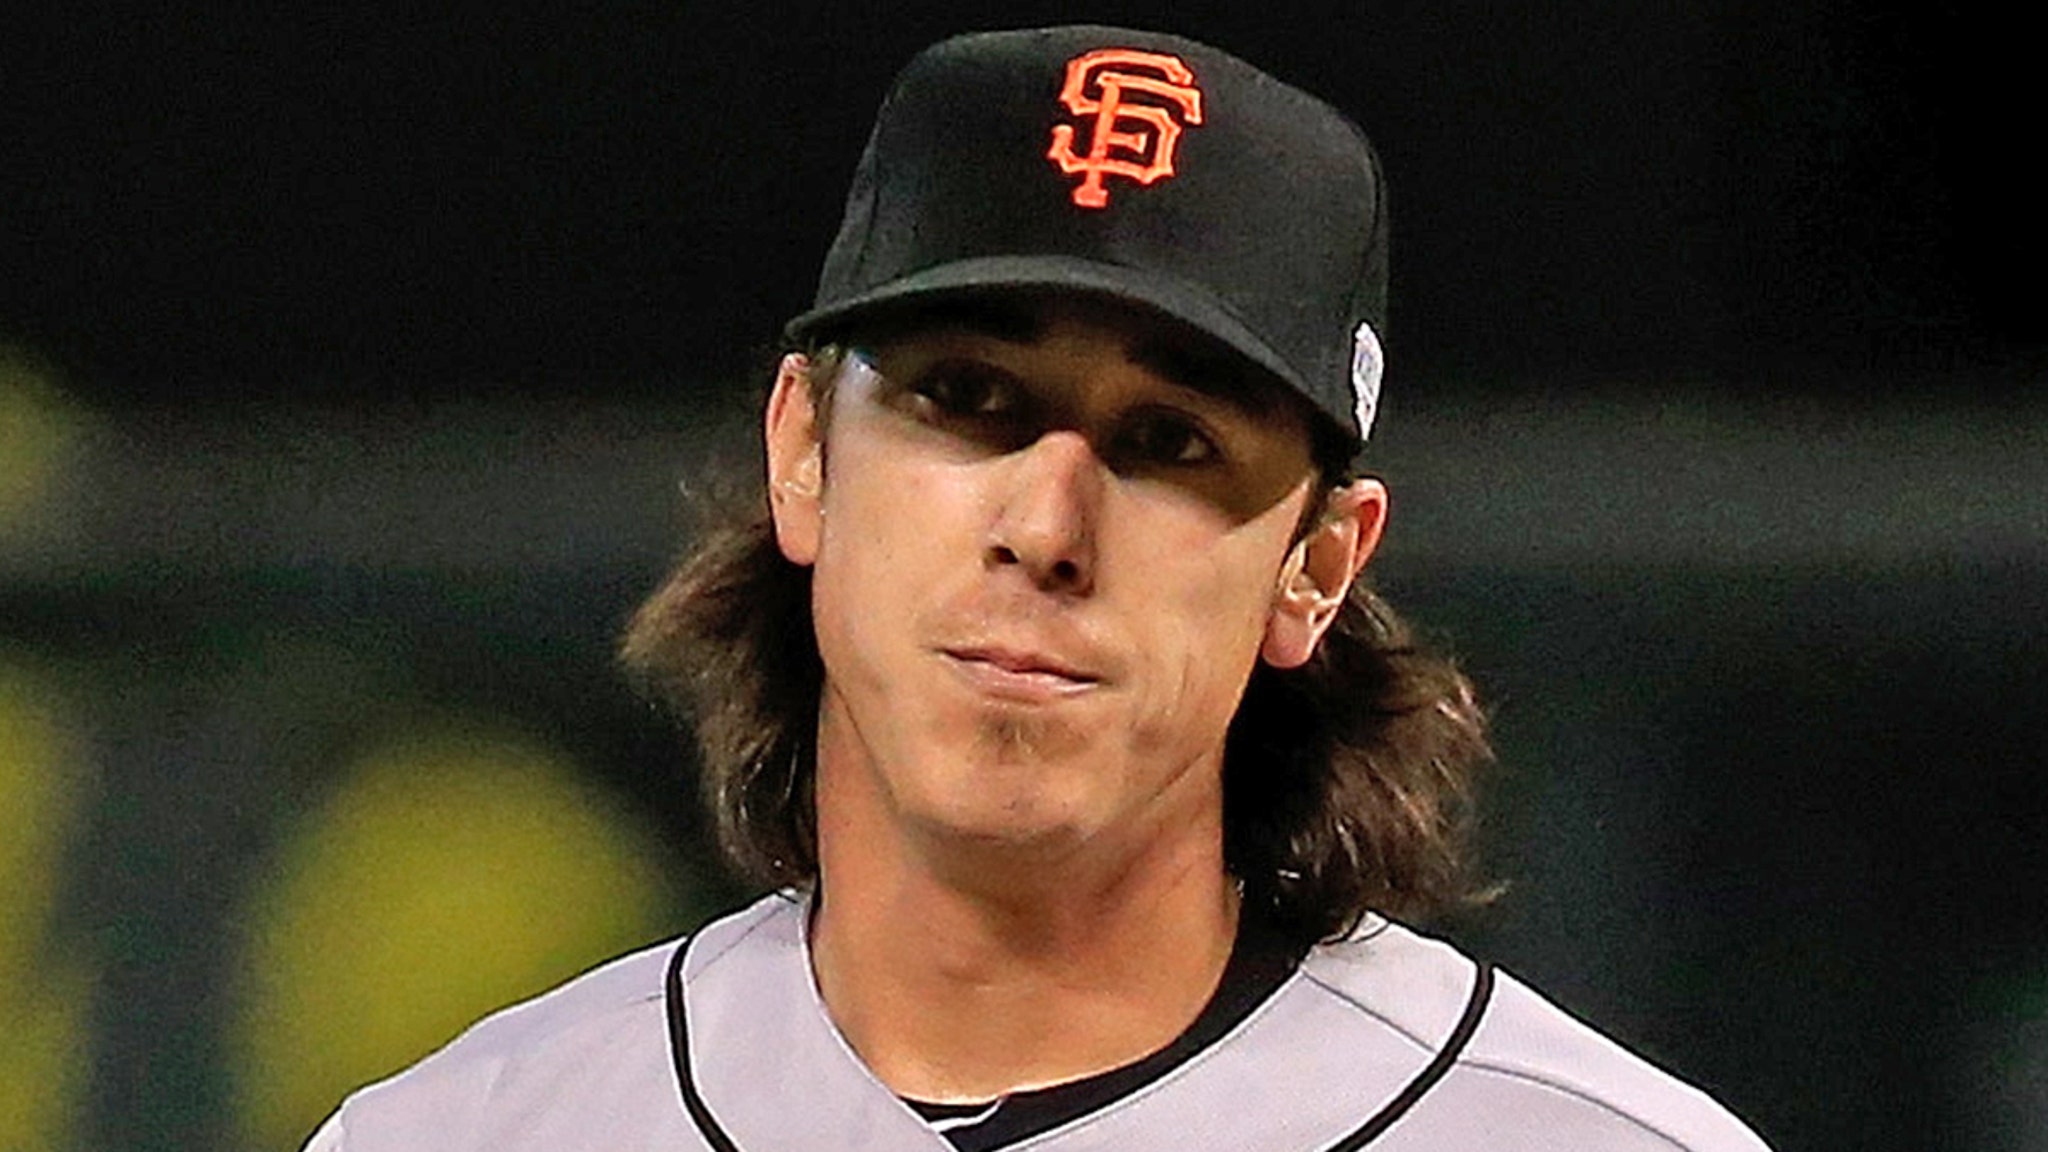 Tim Lincecum's Wife Dies After Battle With Cancer, S.F. Giants Mourn